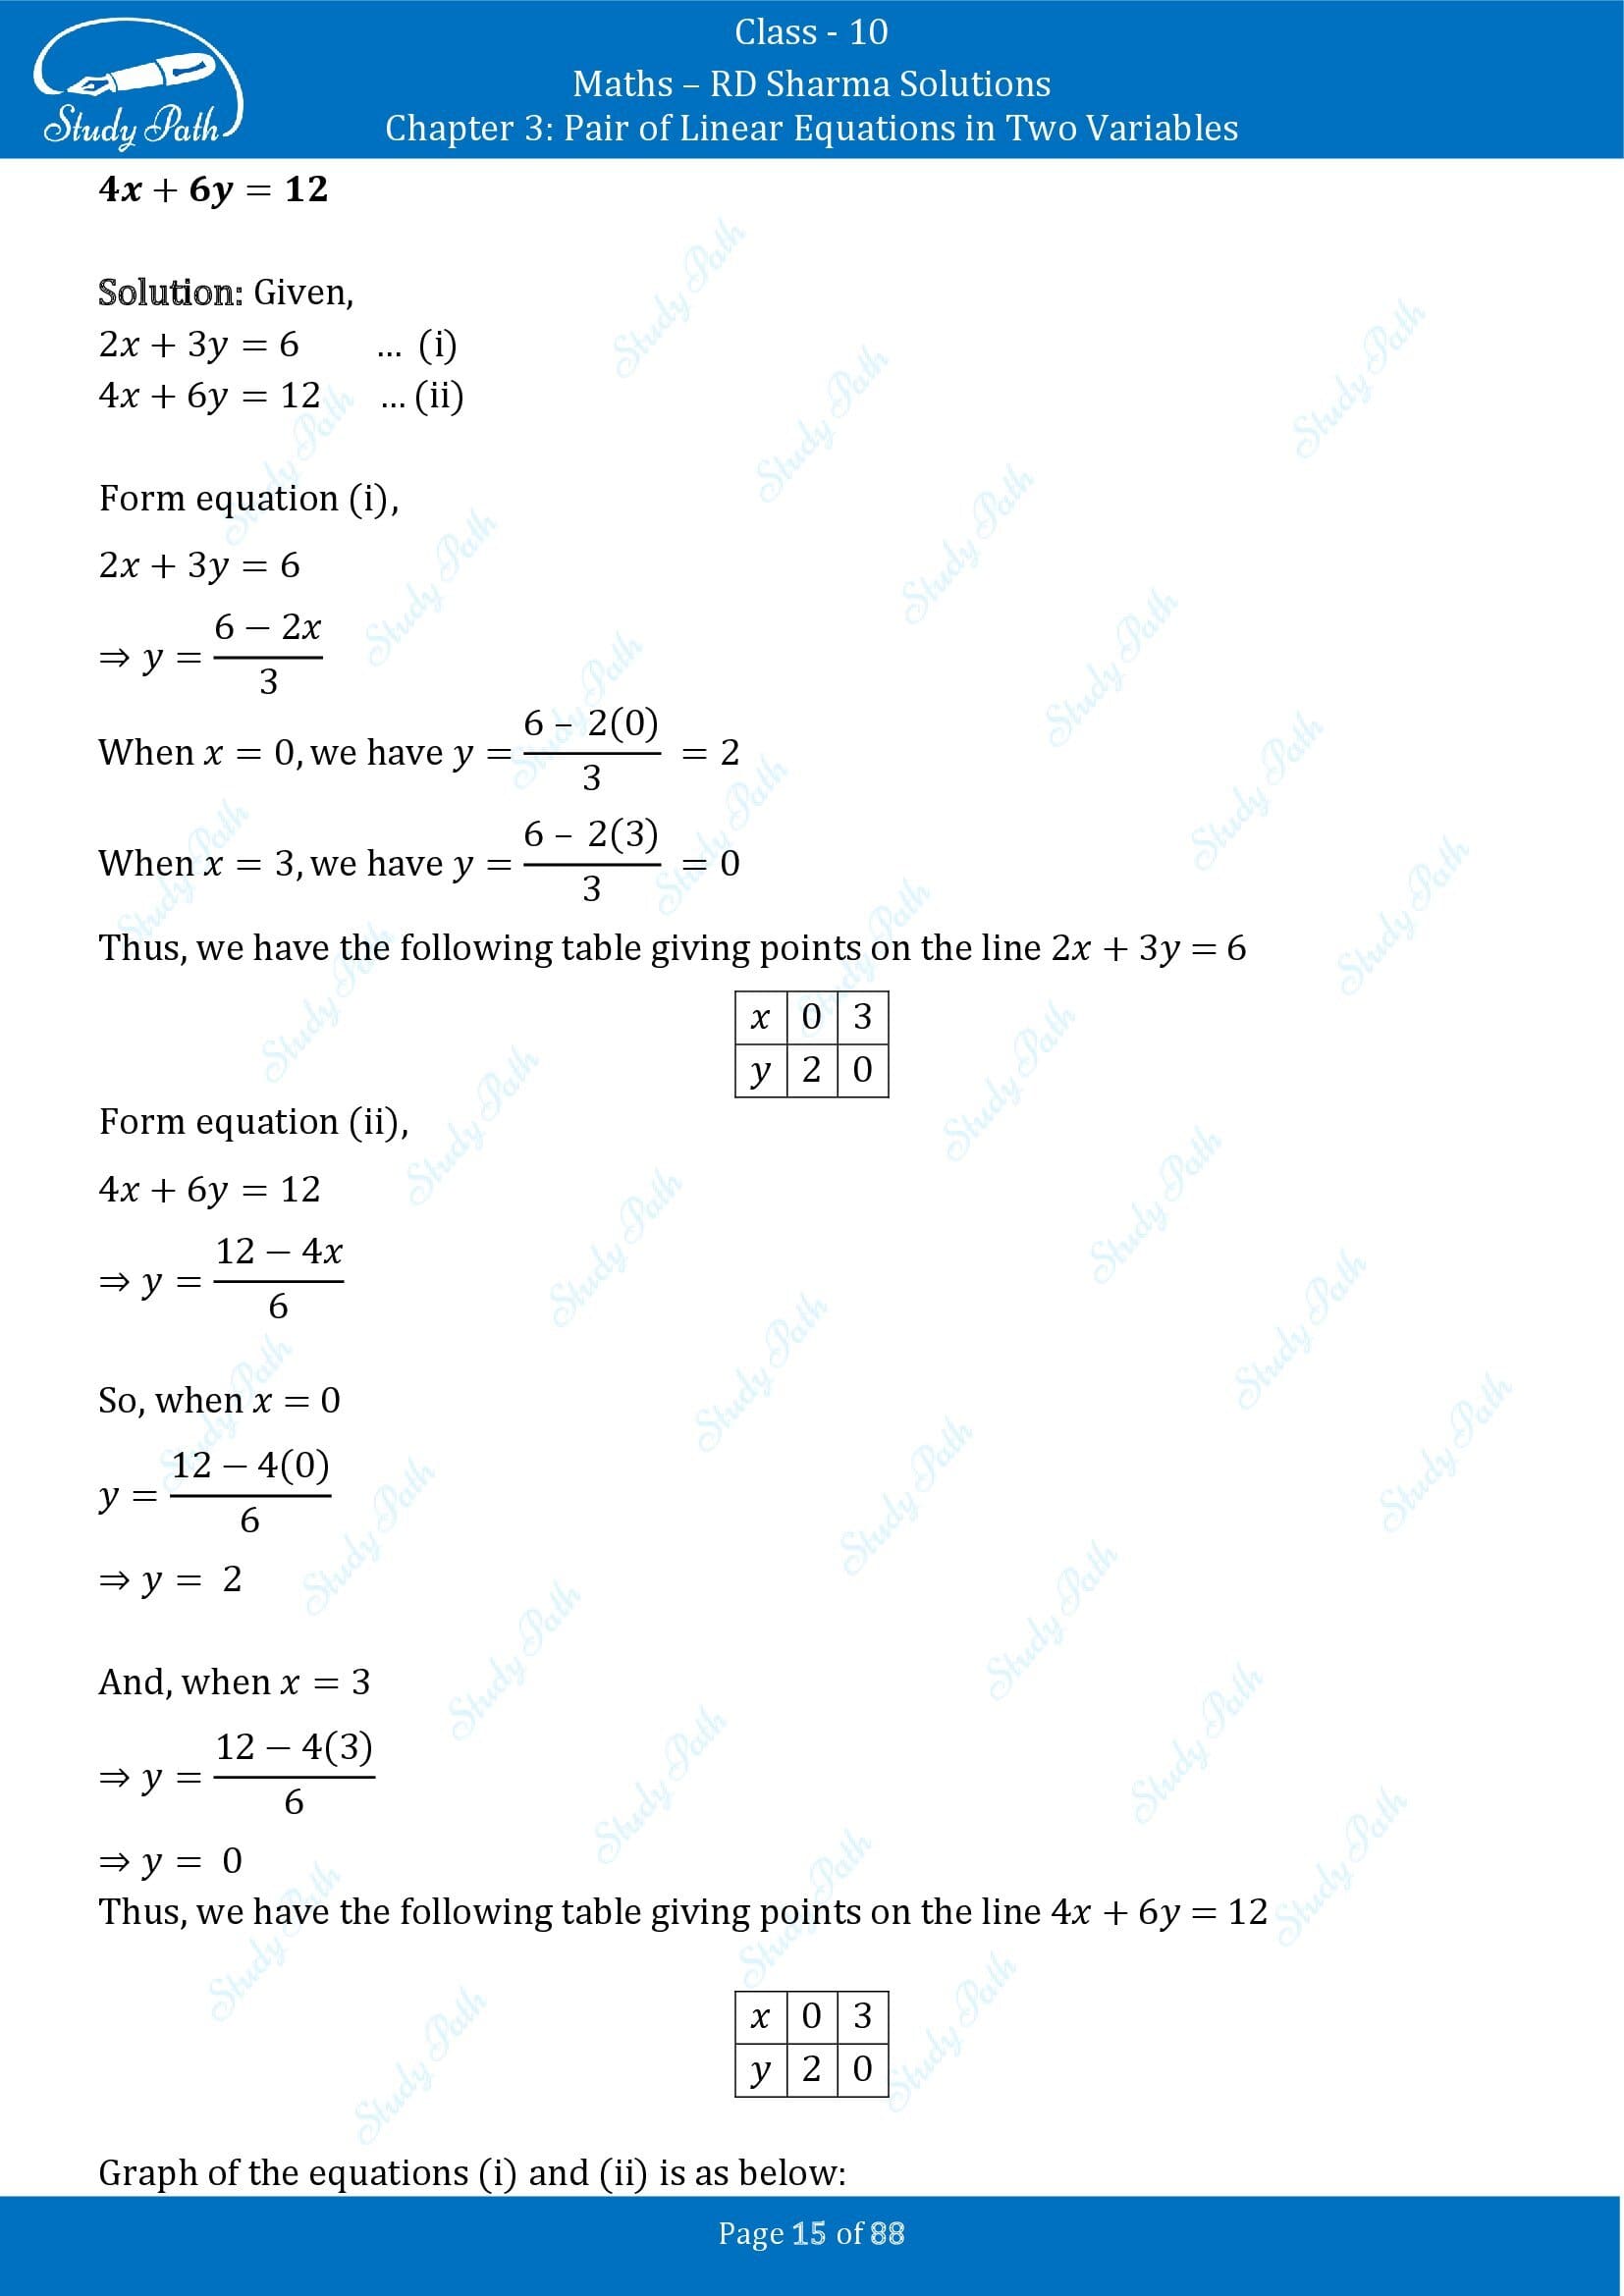 RD Sharma Solutions Class 10 Chapter 3 Pair of Linear Equations in Two Variables Exercise 3.2 00015